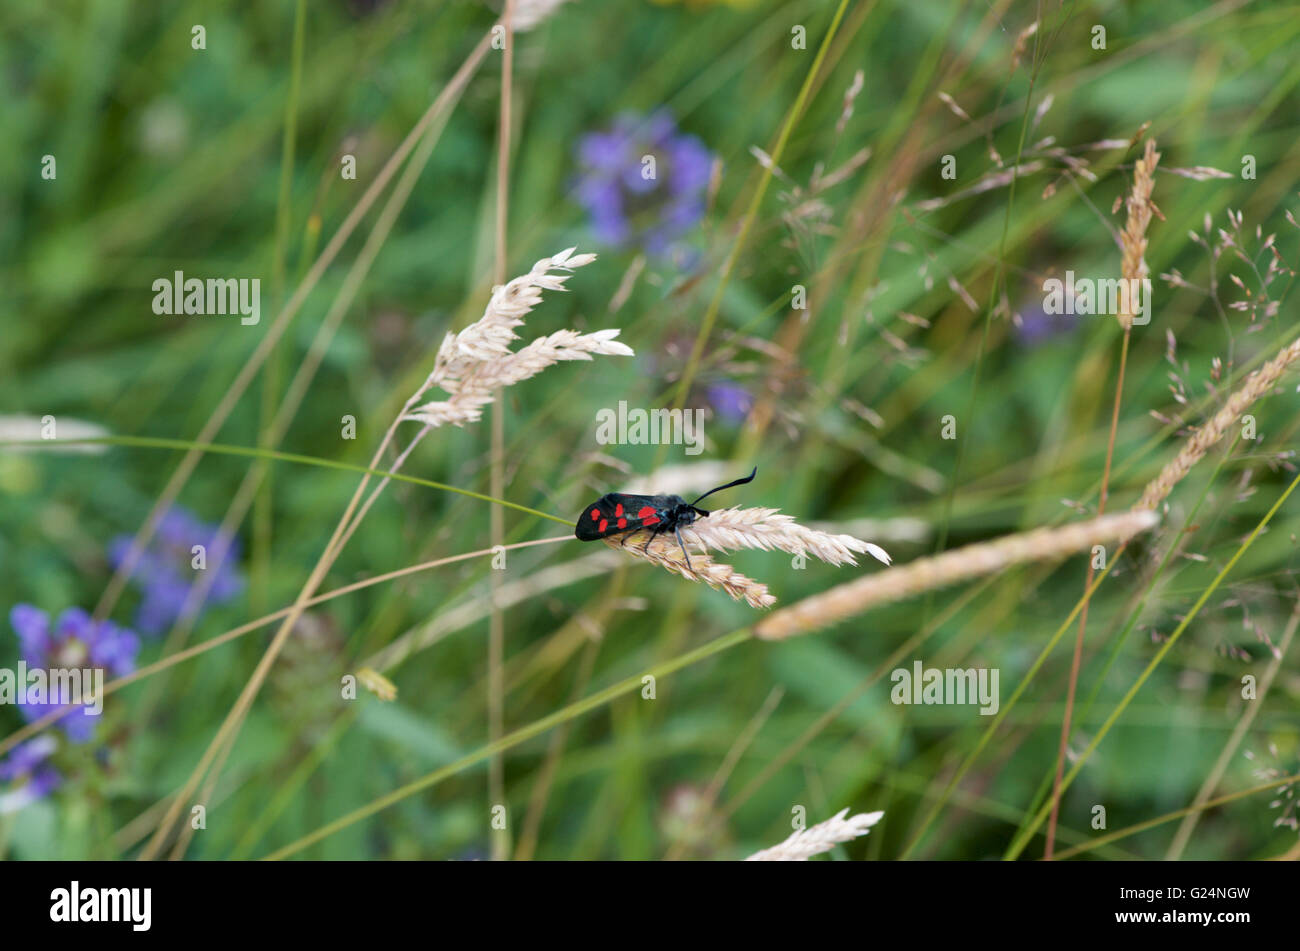 Six-Spot Burnet Moth in a natural meadow Stock Photo